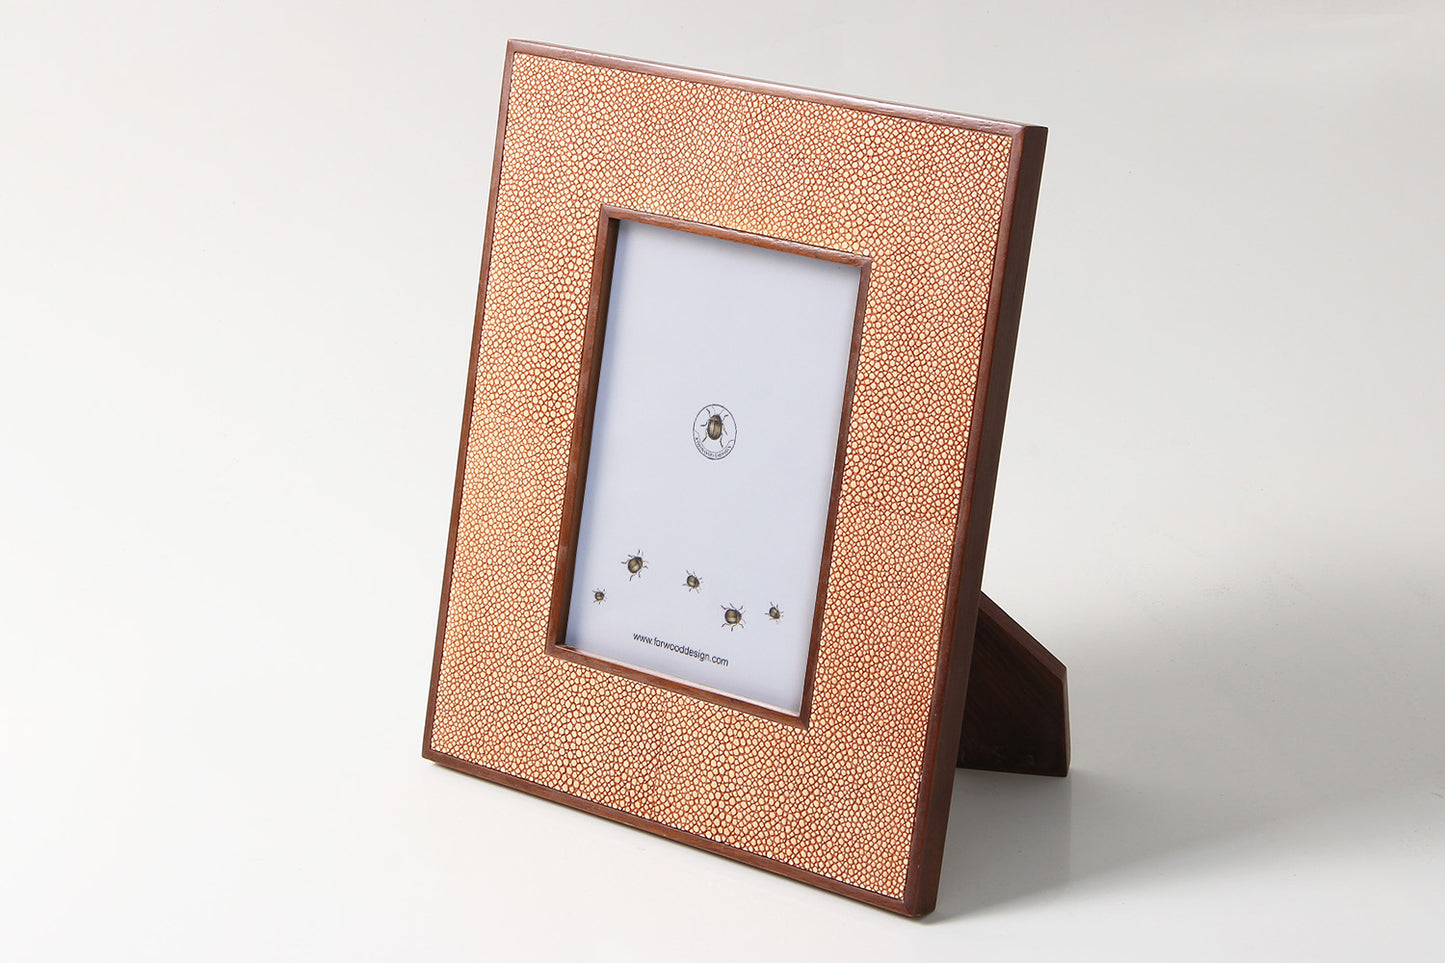 Classic Photo Frames in Coral Shagreen